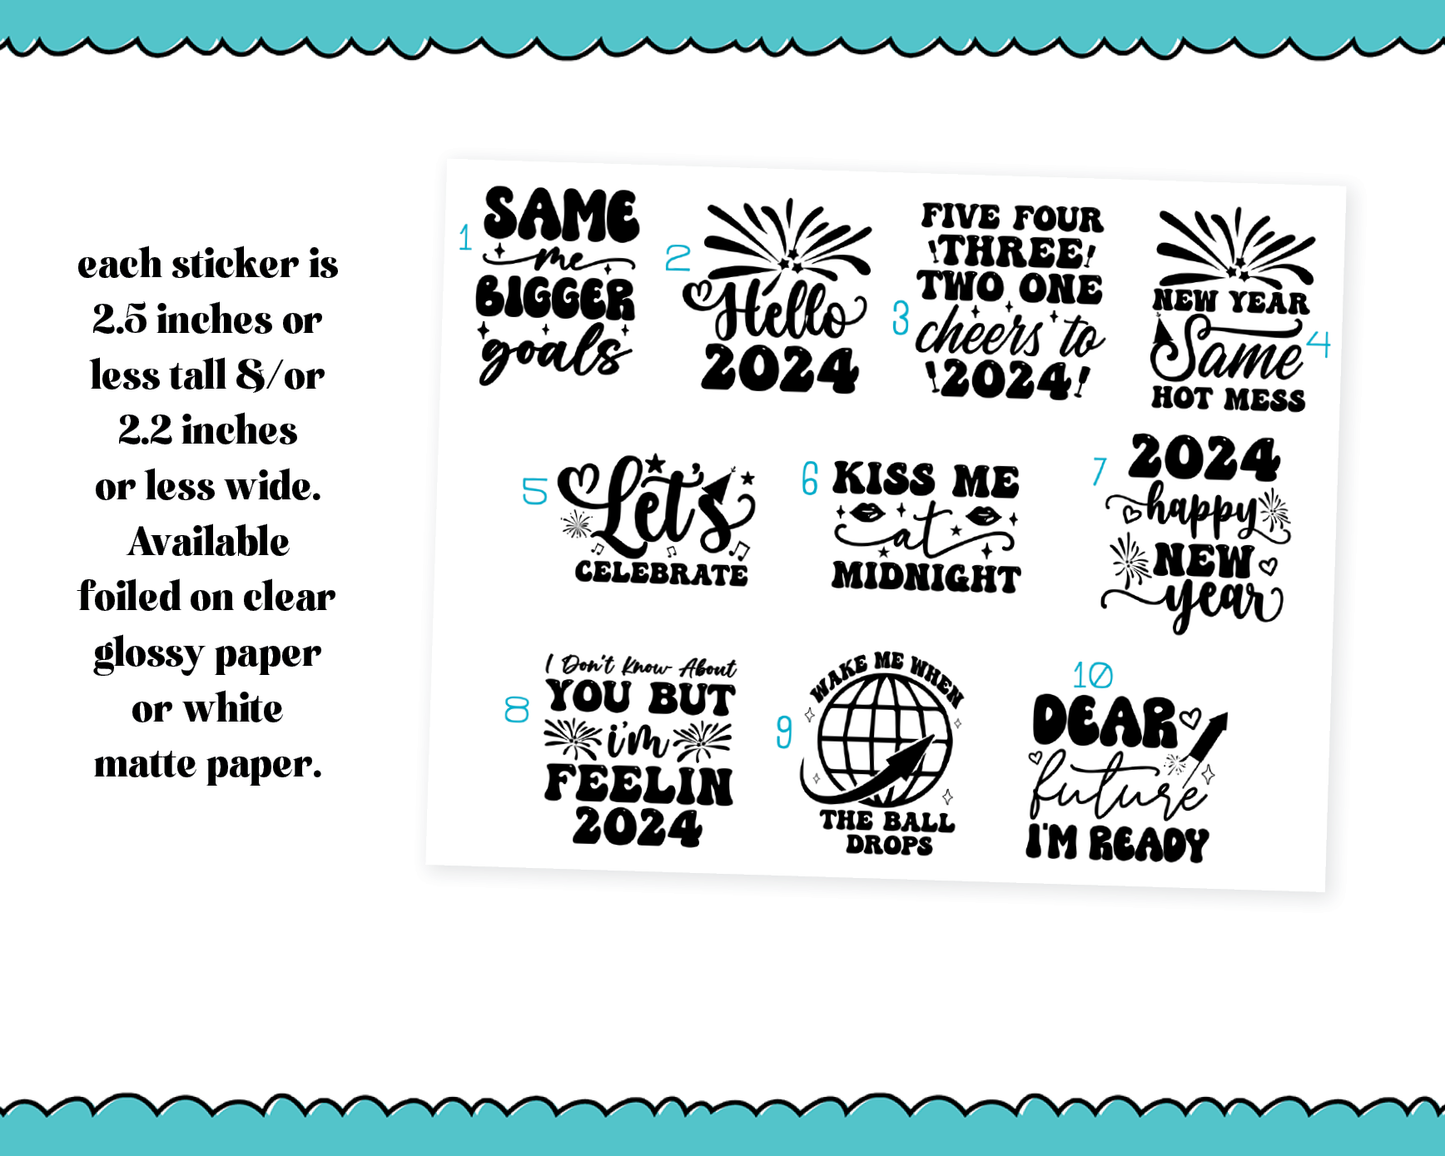 Large Diecut Sticker Flakes - Same Me Bigger Goals New Year Quotes Planner Stickers for any Planner or Insert